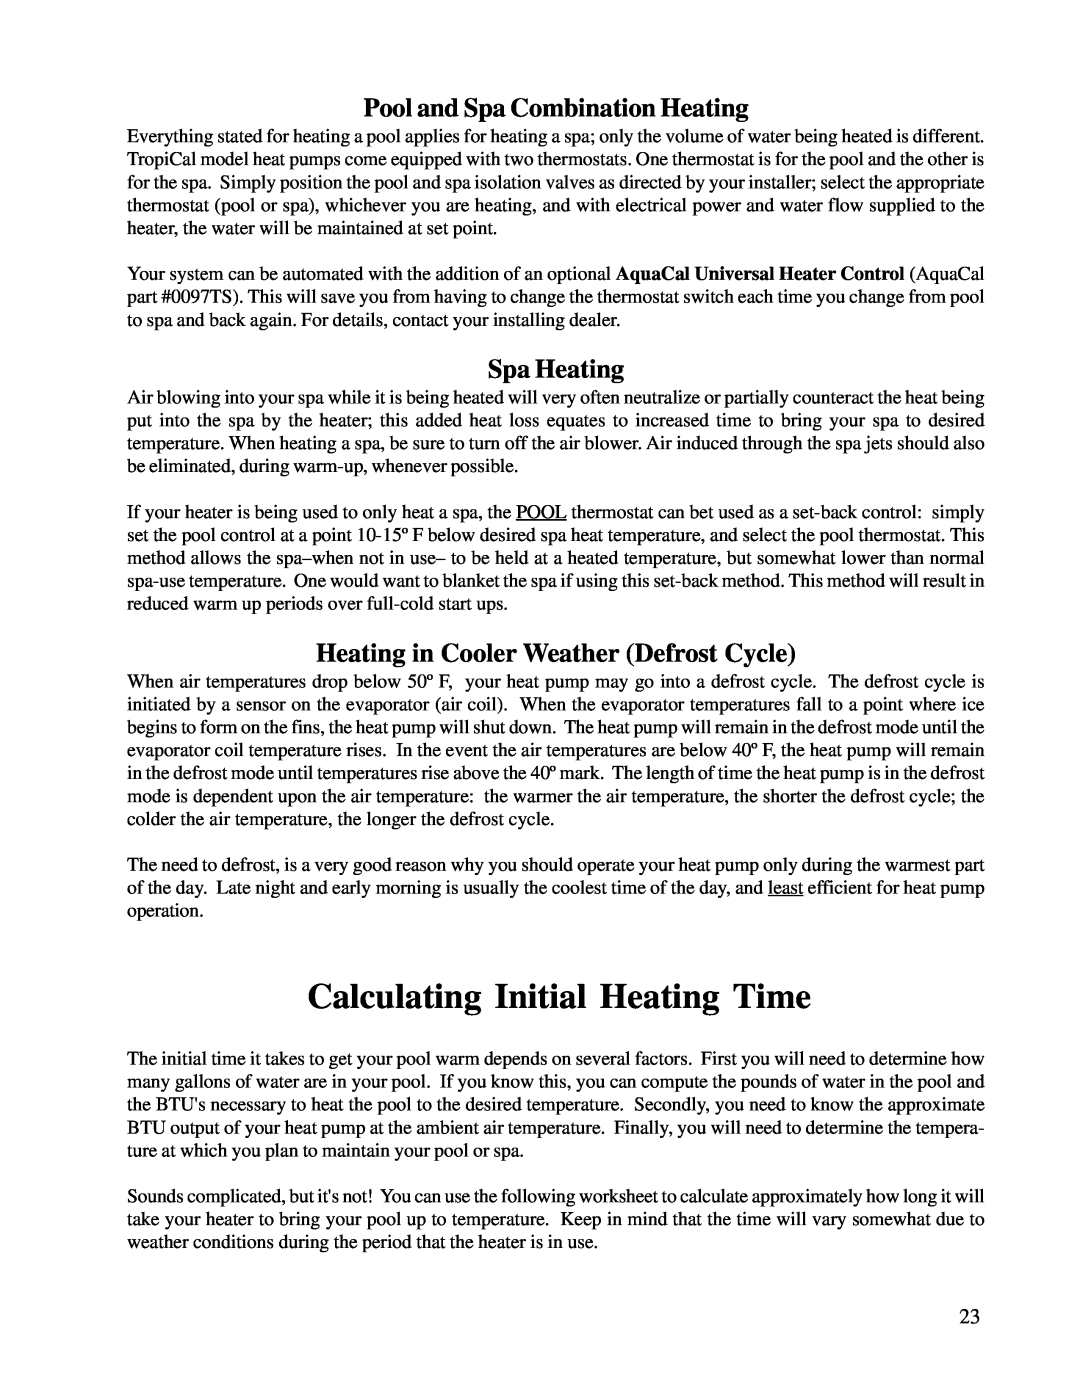 Aquacal T135, T65, T115 owner manual Calculating Initial Heating Time, Pool and Spa Combination Heating, Spa Heating 